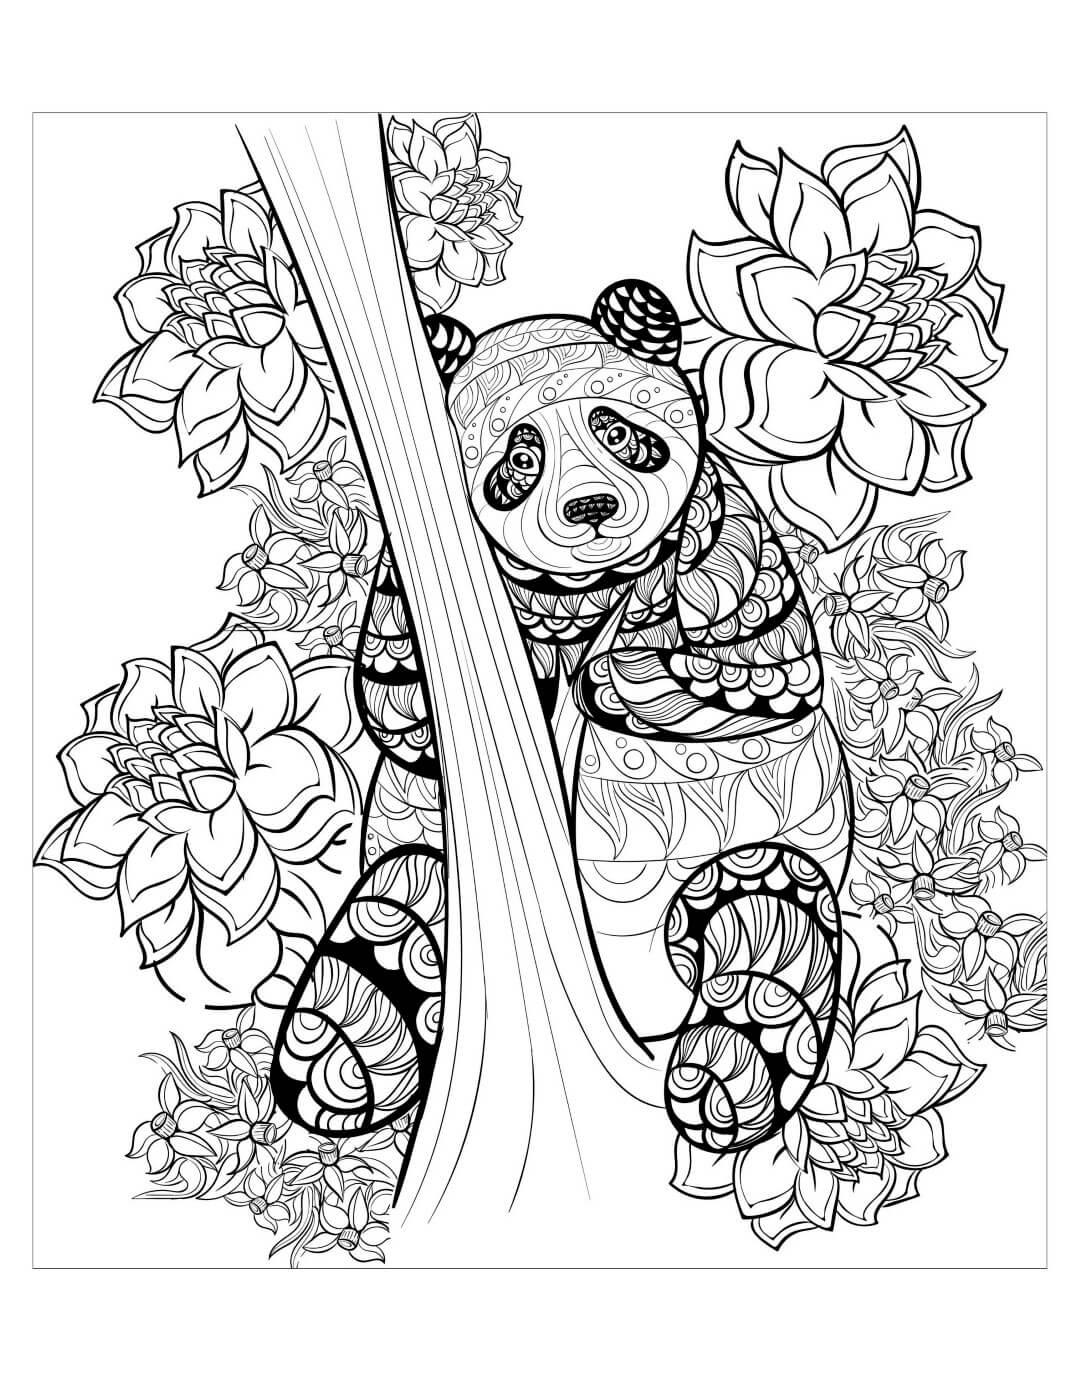 Panda in Tree Coloring Page